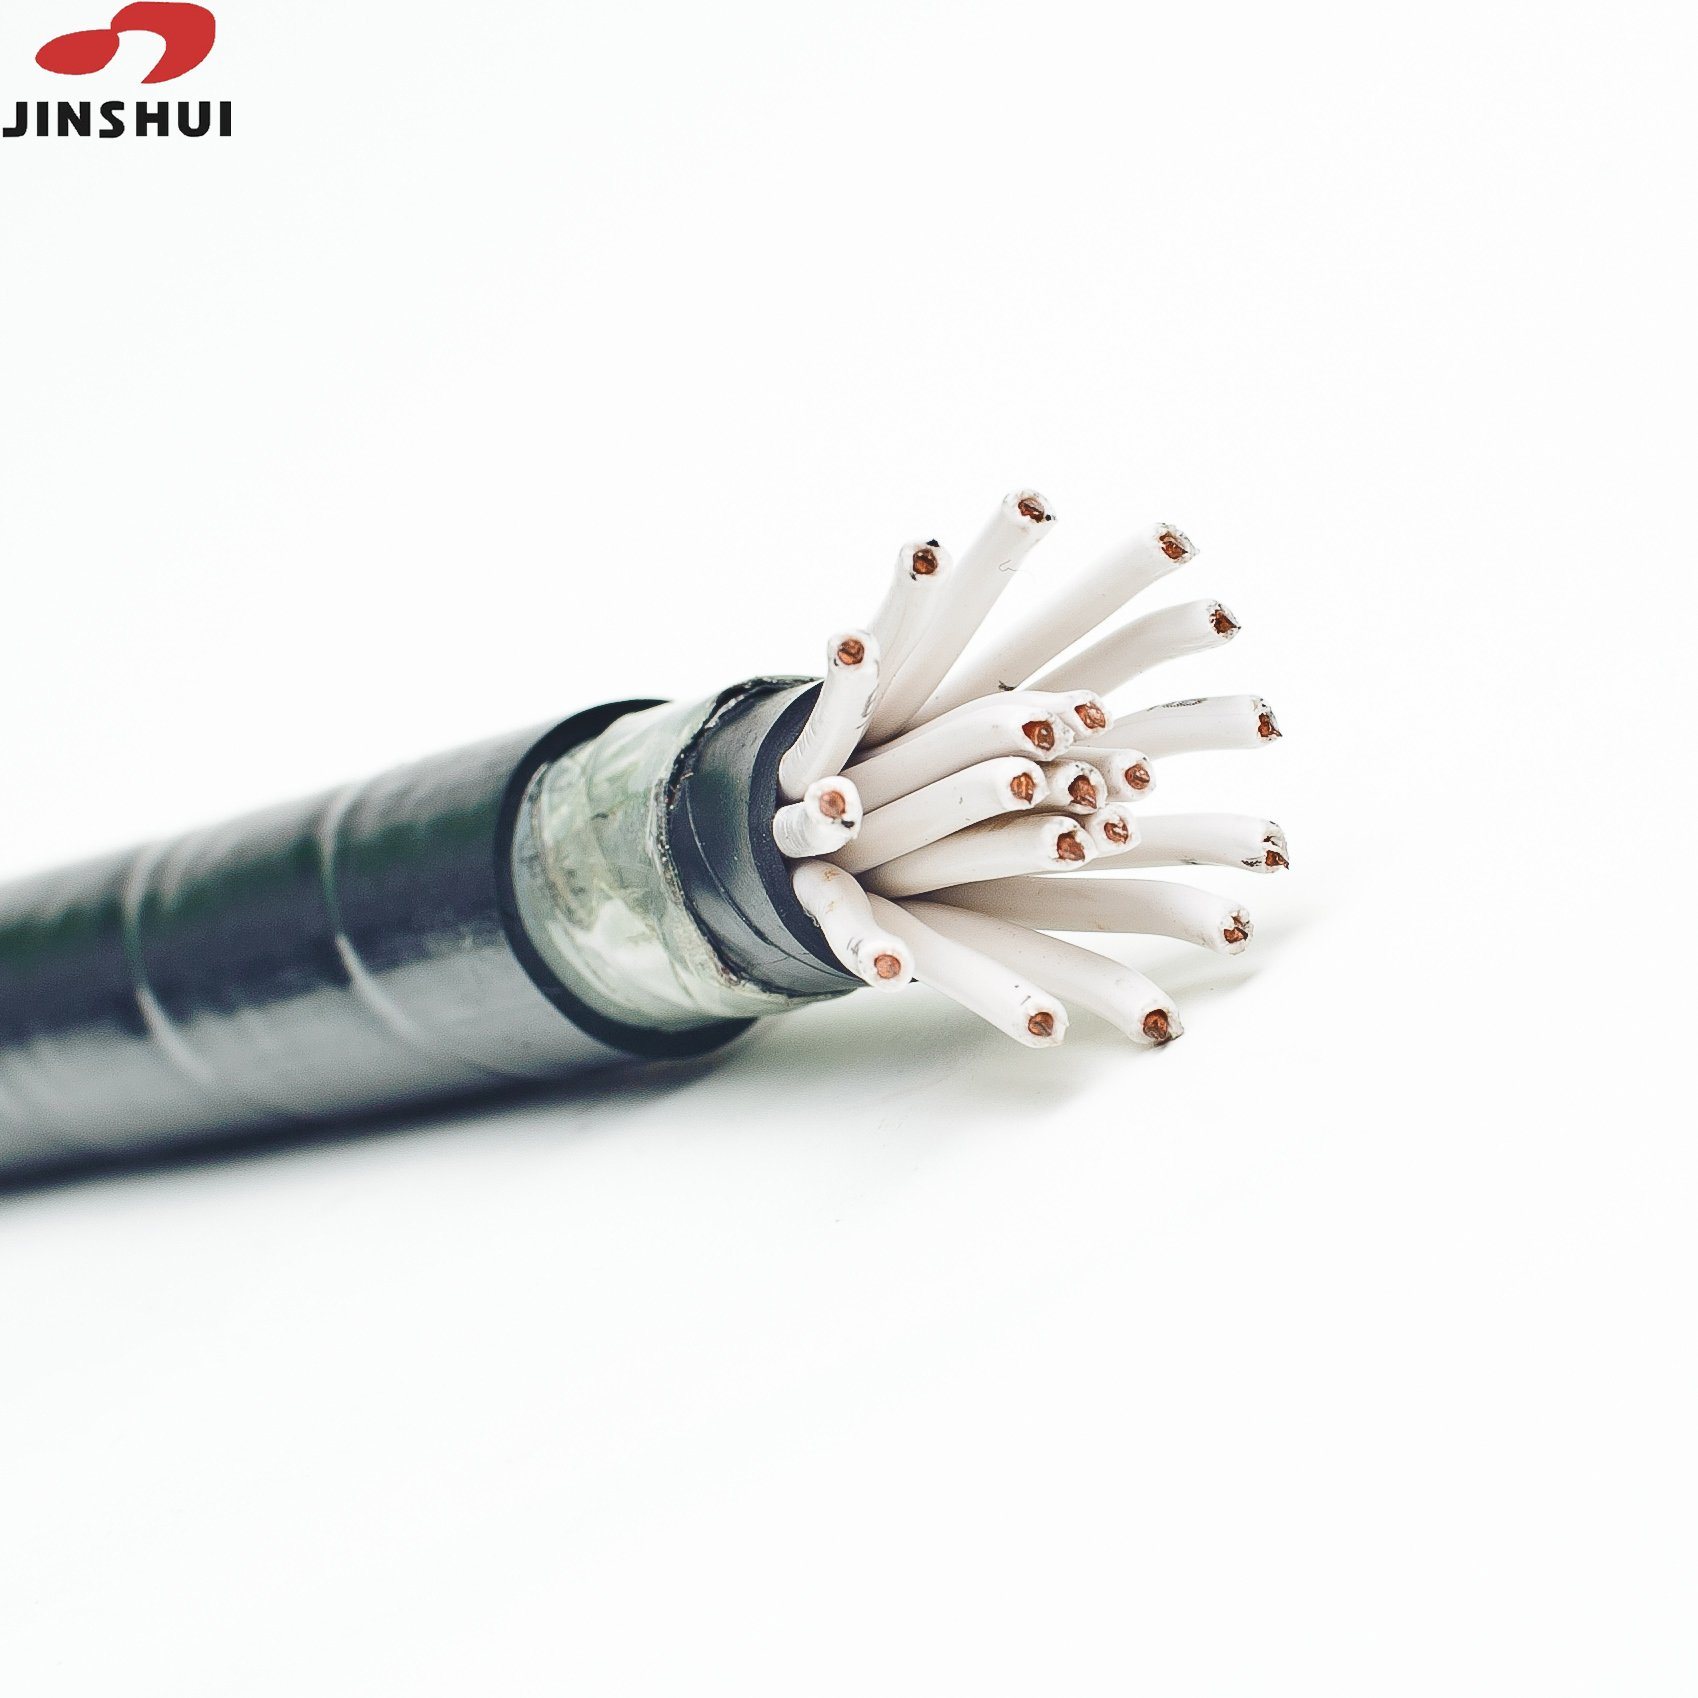 Low Voltage Computer Flexible Multicore Cable with PVC Insulated Cable